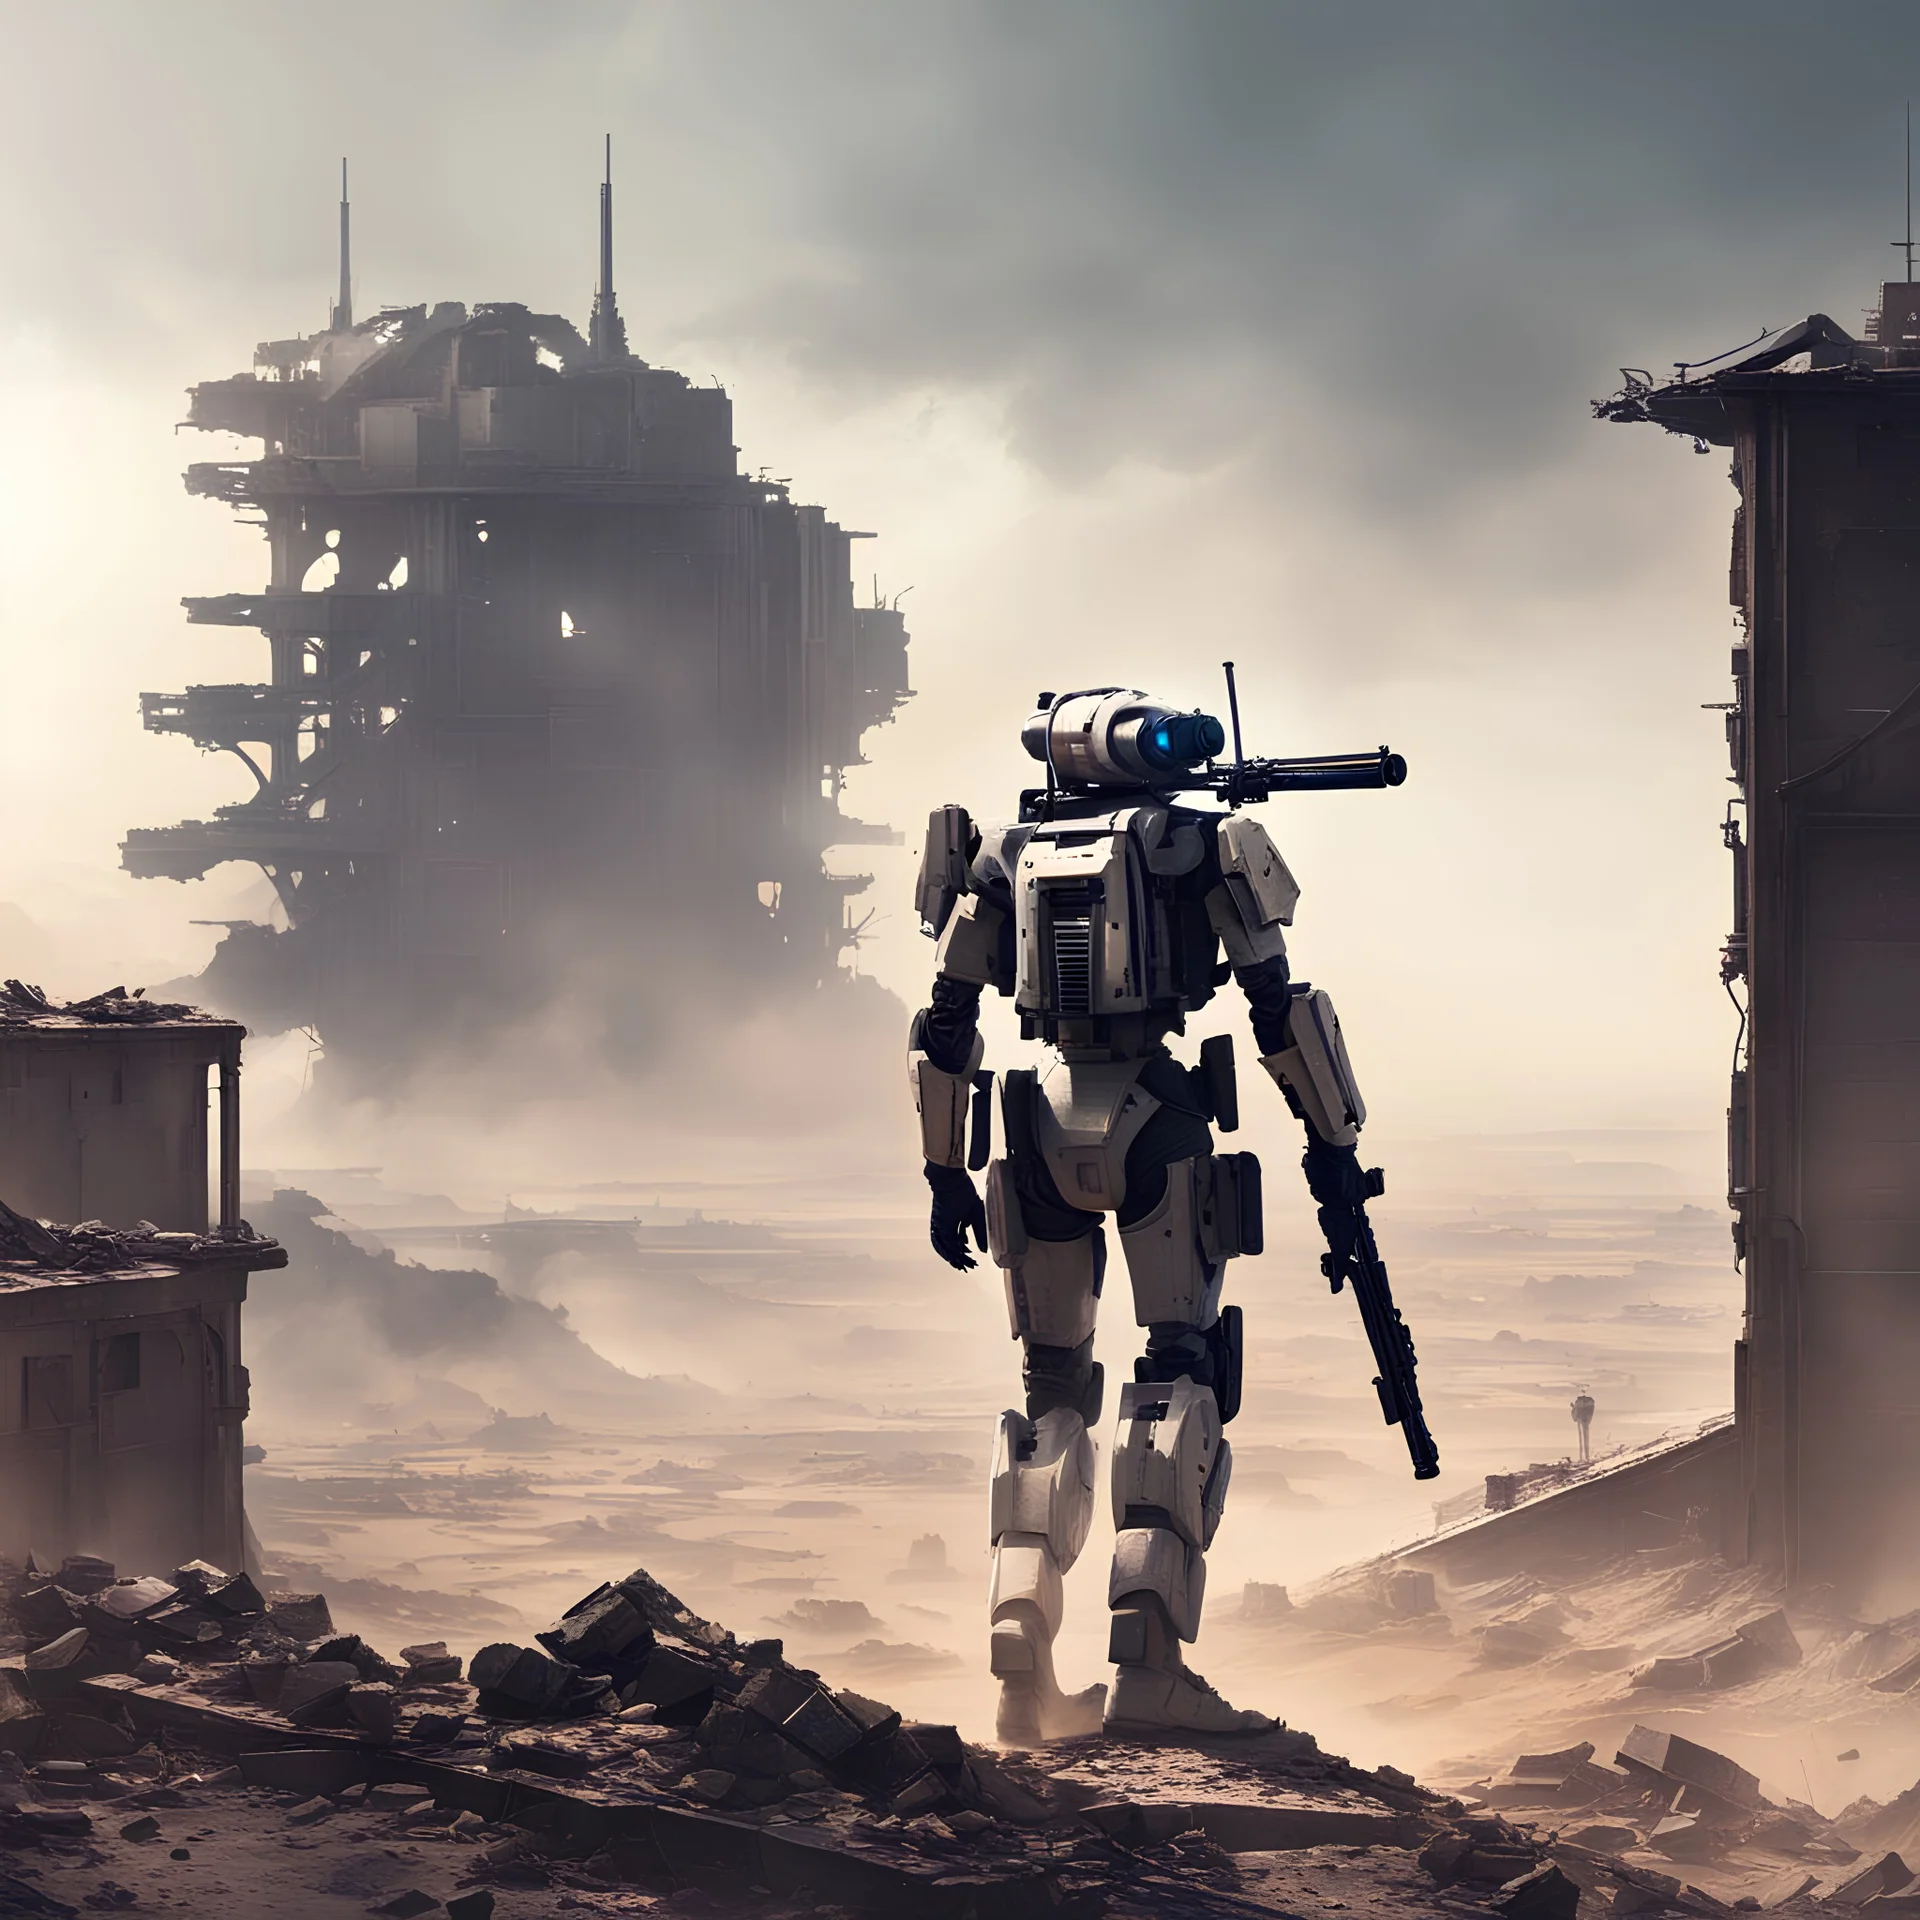 Scifi robotic sniper, on the top of a ruined building, in the dust